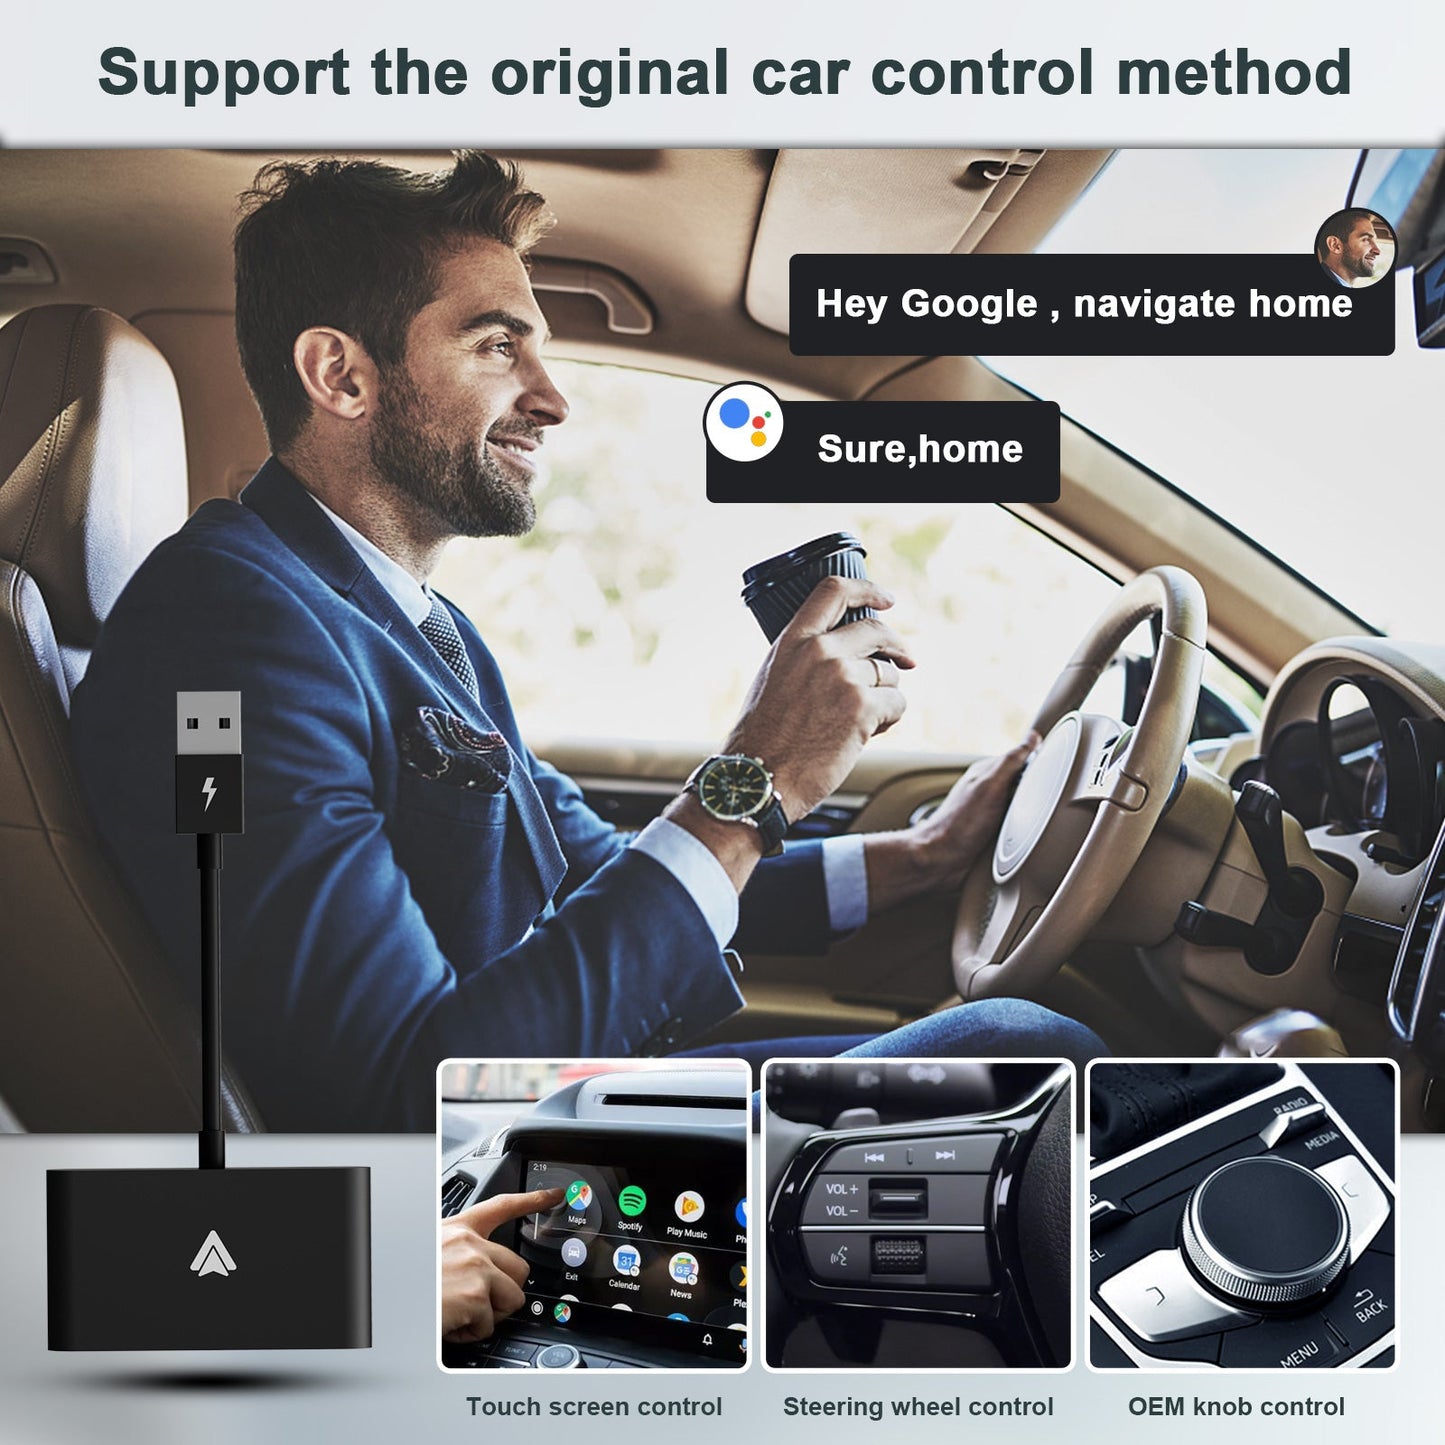 EXPLOTER Wired Android Auto Convert to Wireless CP-800 W20 Wi-Fi 2.4GHz and 5GHz Automatically connect